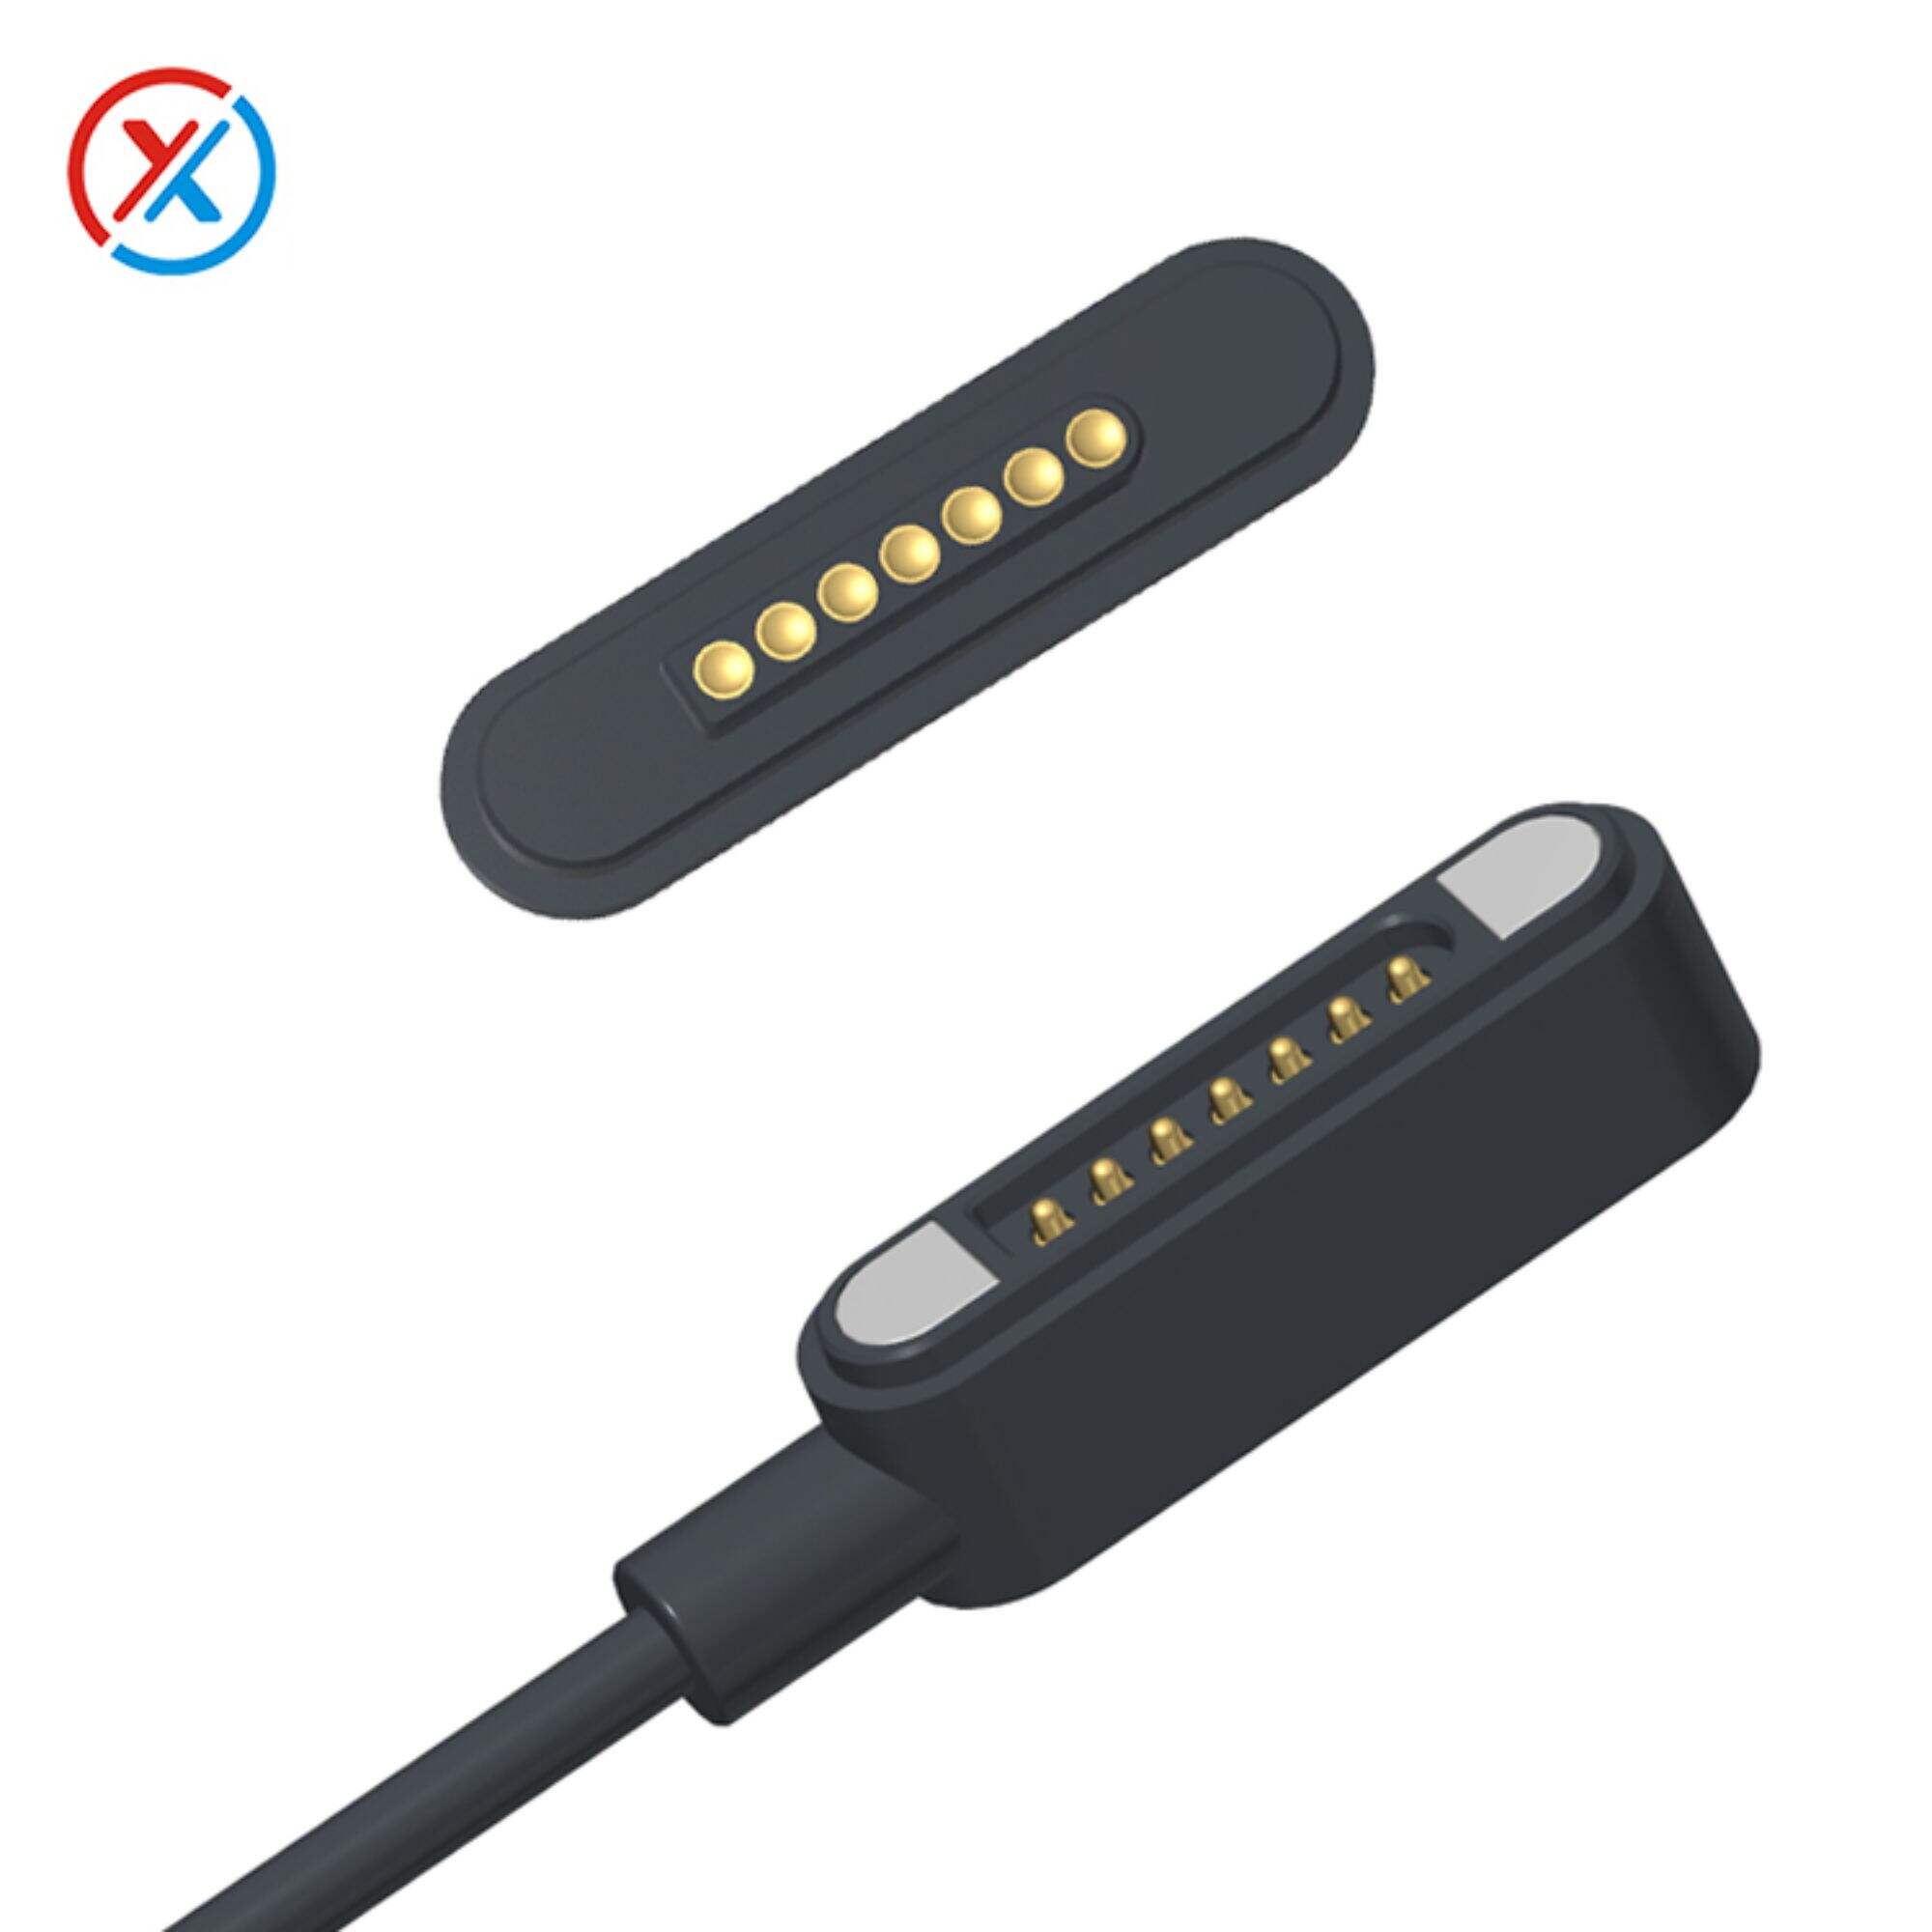 Rectangular 7PIN magnetic cable China manufacturers,inexpensive magnetic data cable male and female ends